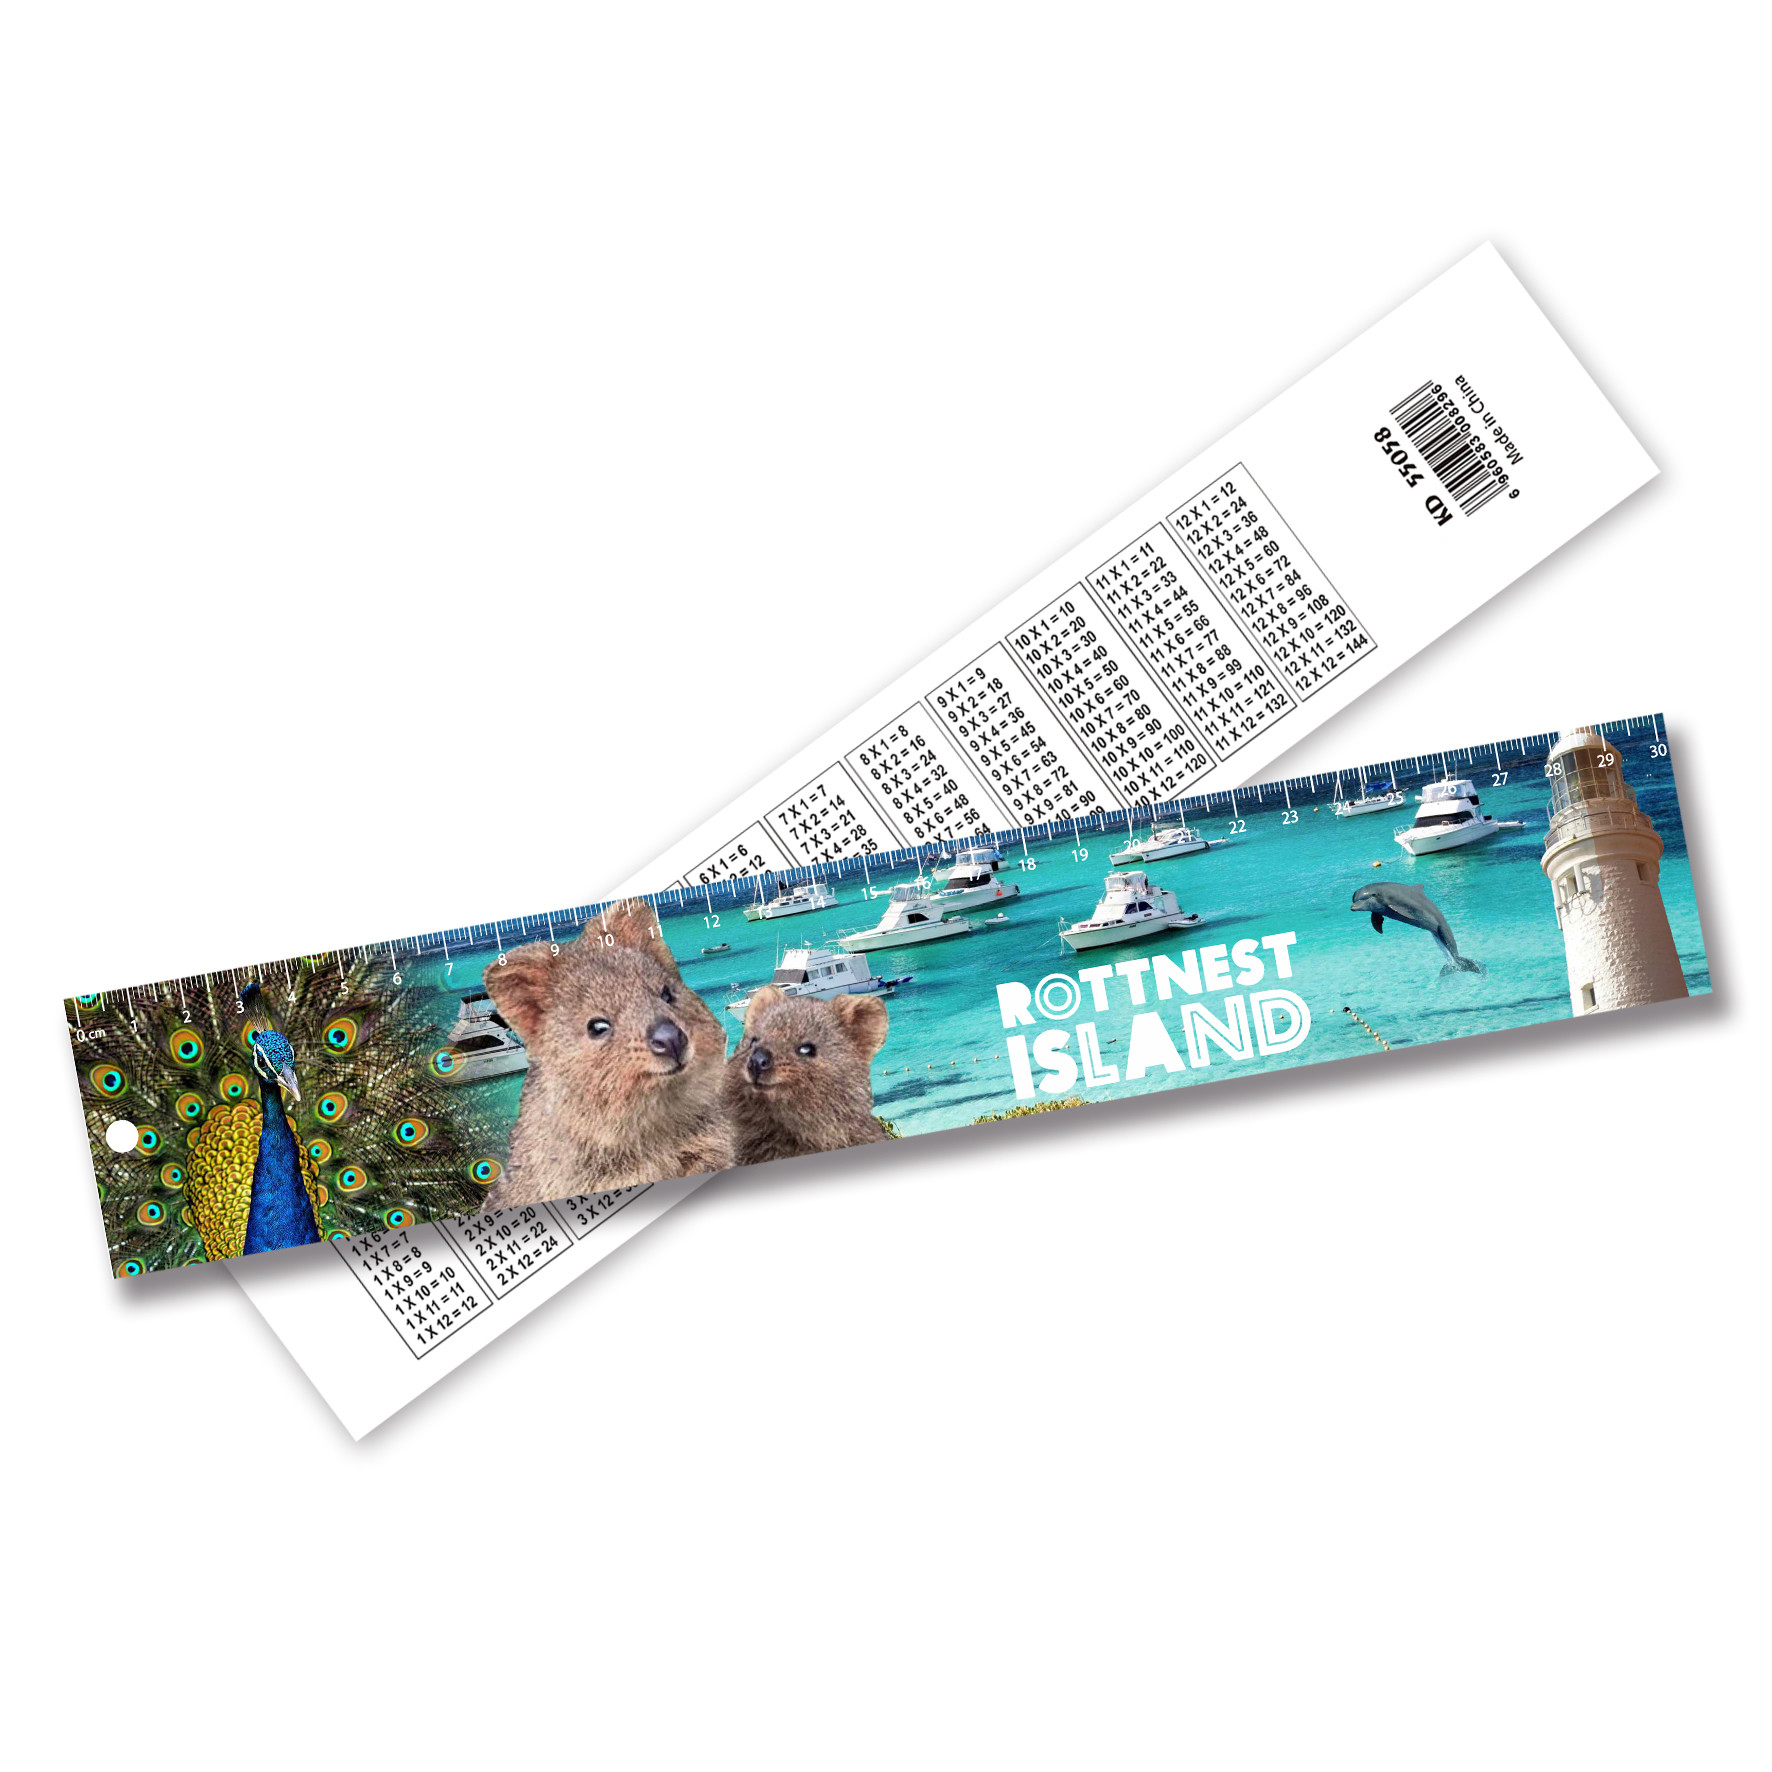 Best Promotional PET 3D Lenticular Printing Services Plastic Rulers / Lenticular Photo Printing wholesale